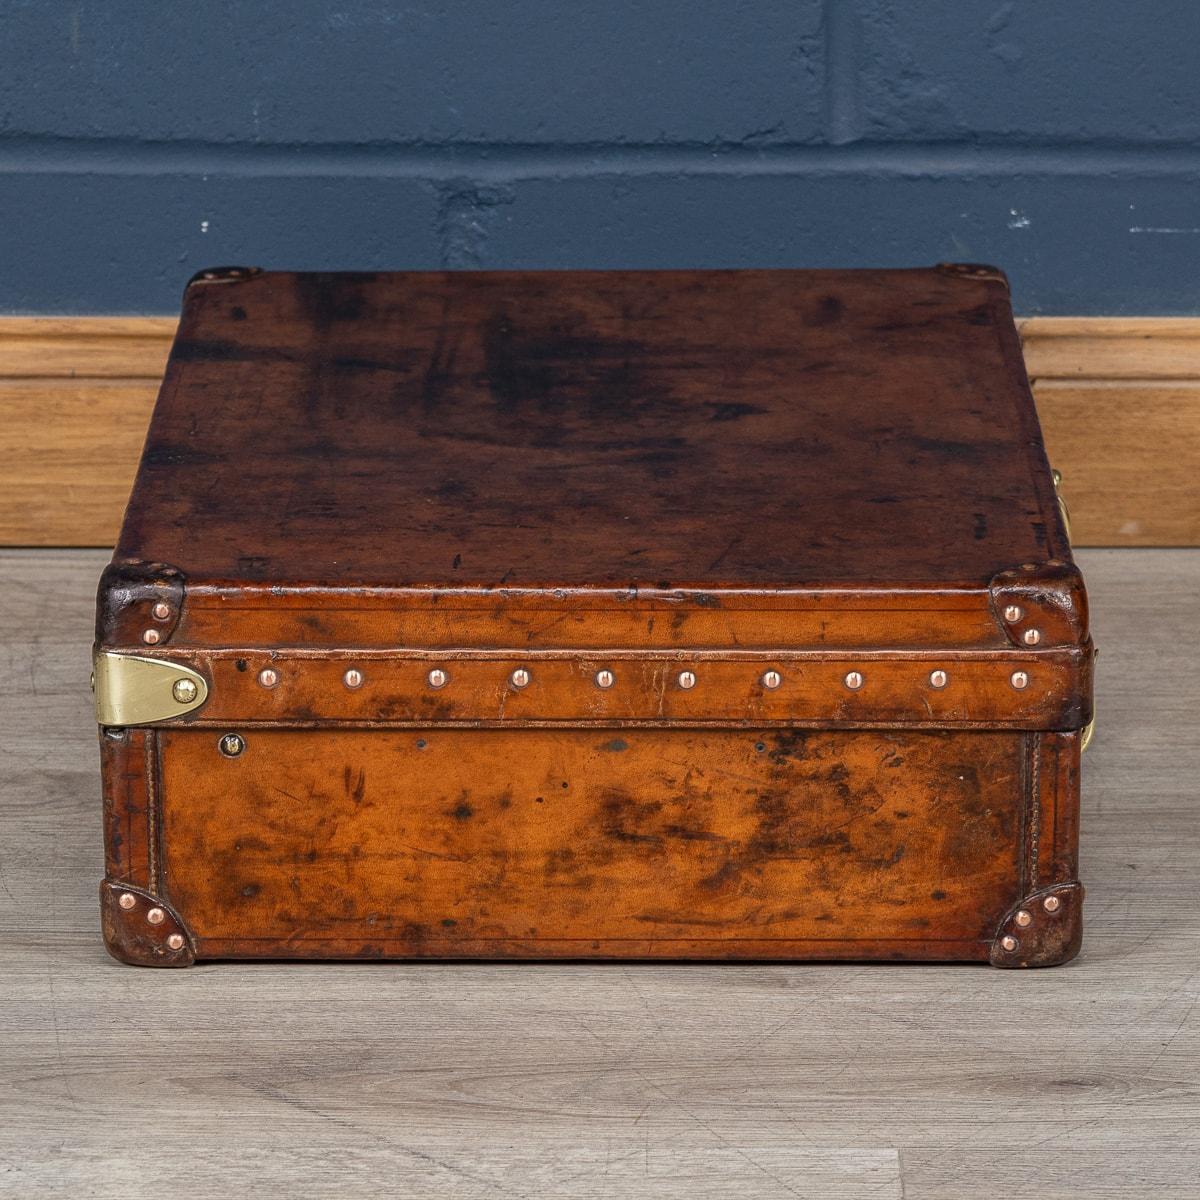 Brass 20th Century Louis Vuitton Suitcase In Natural Cow Hide, France c.1910 For Sale